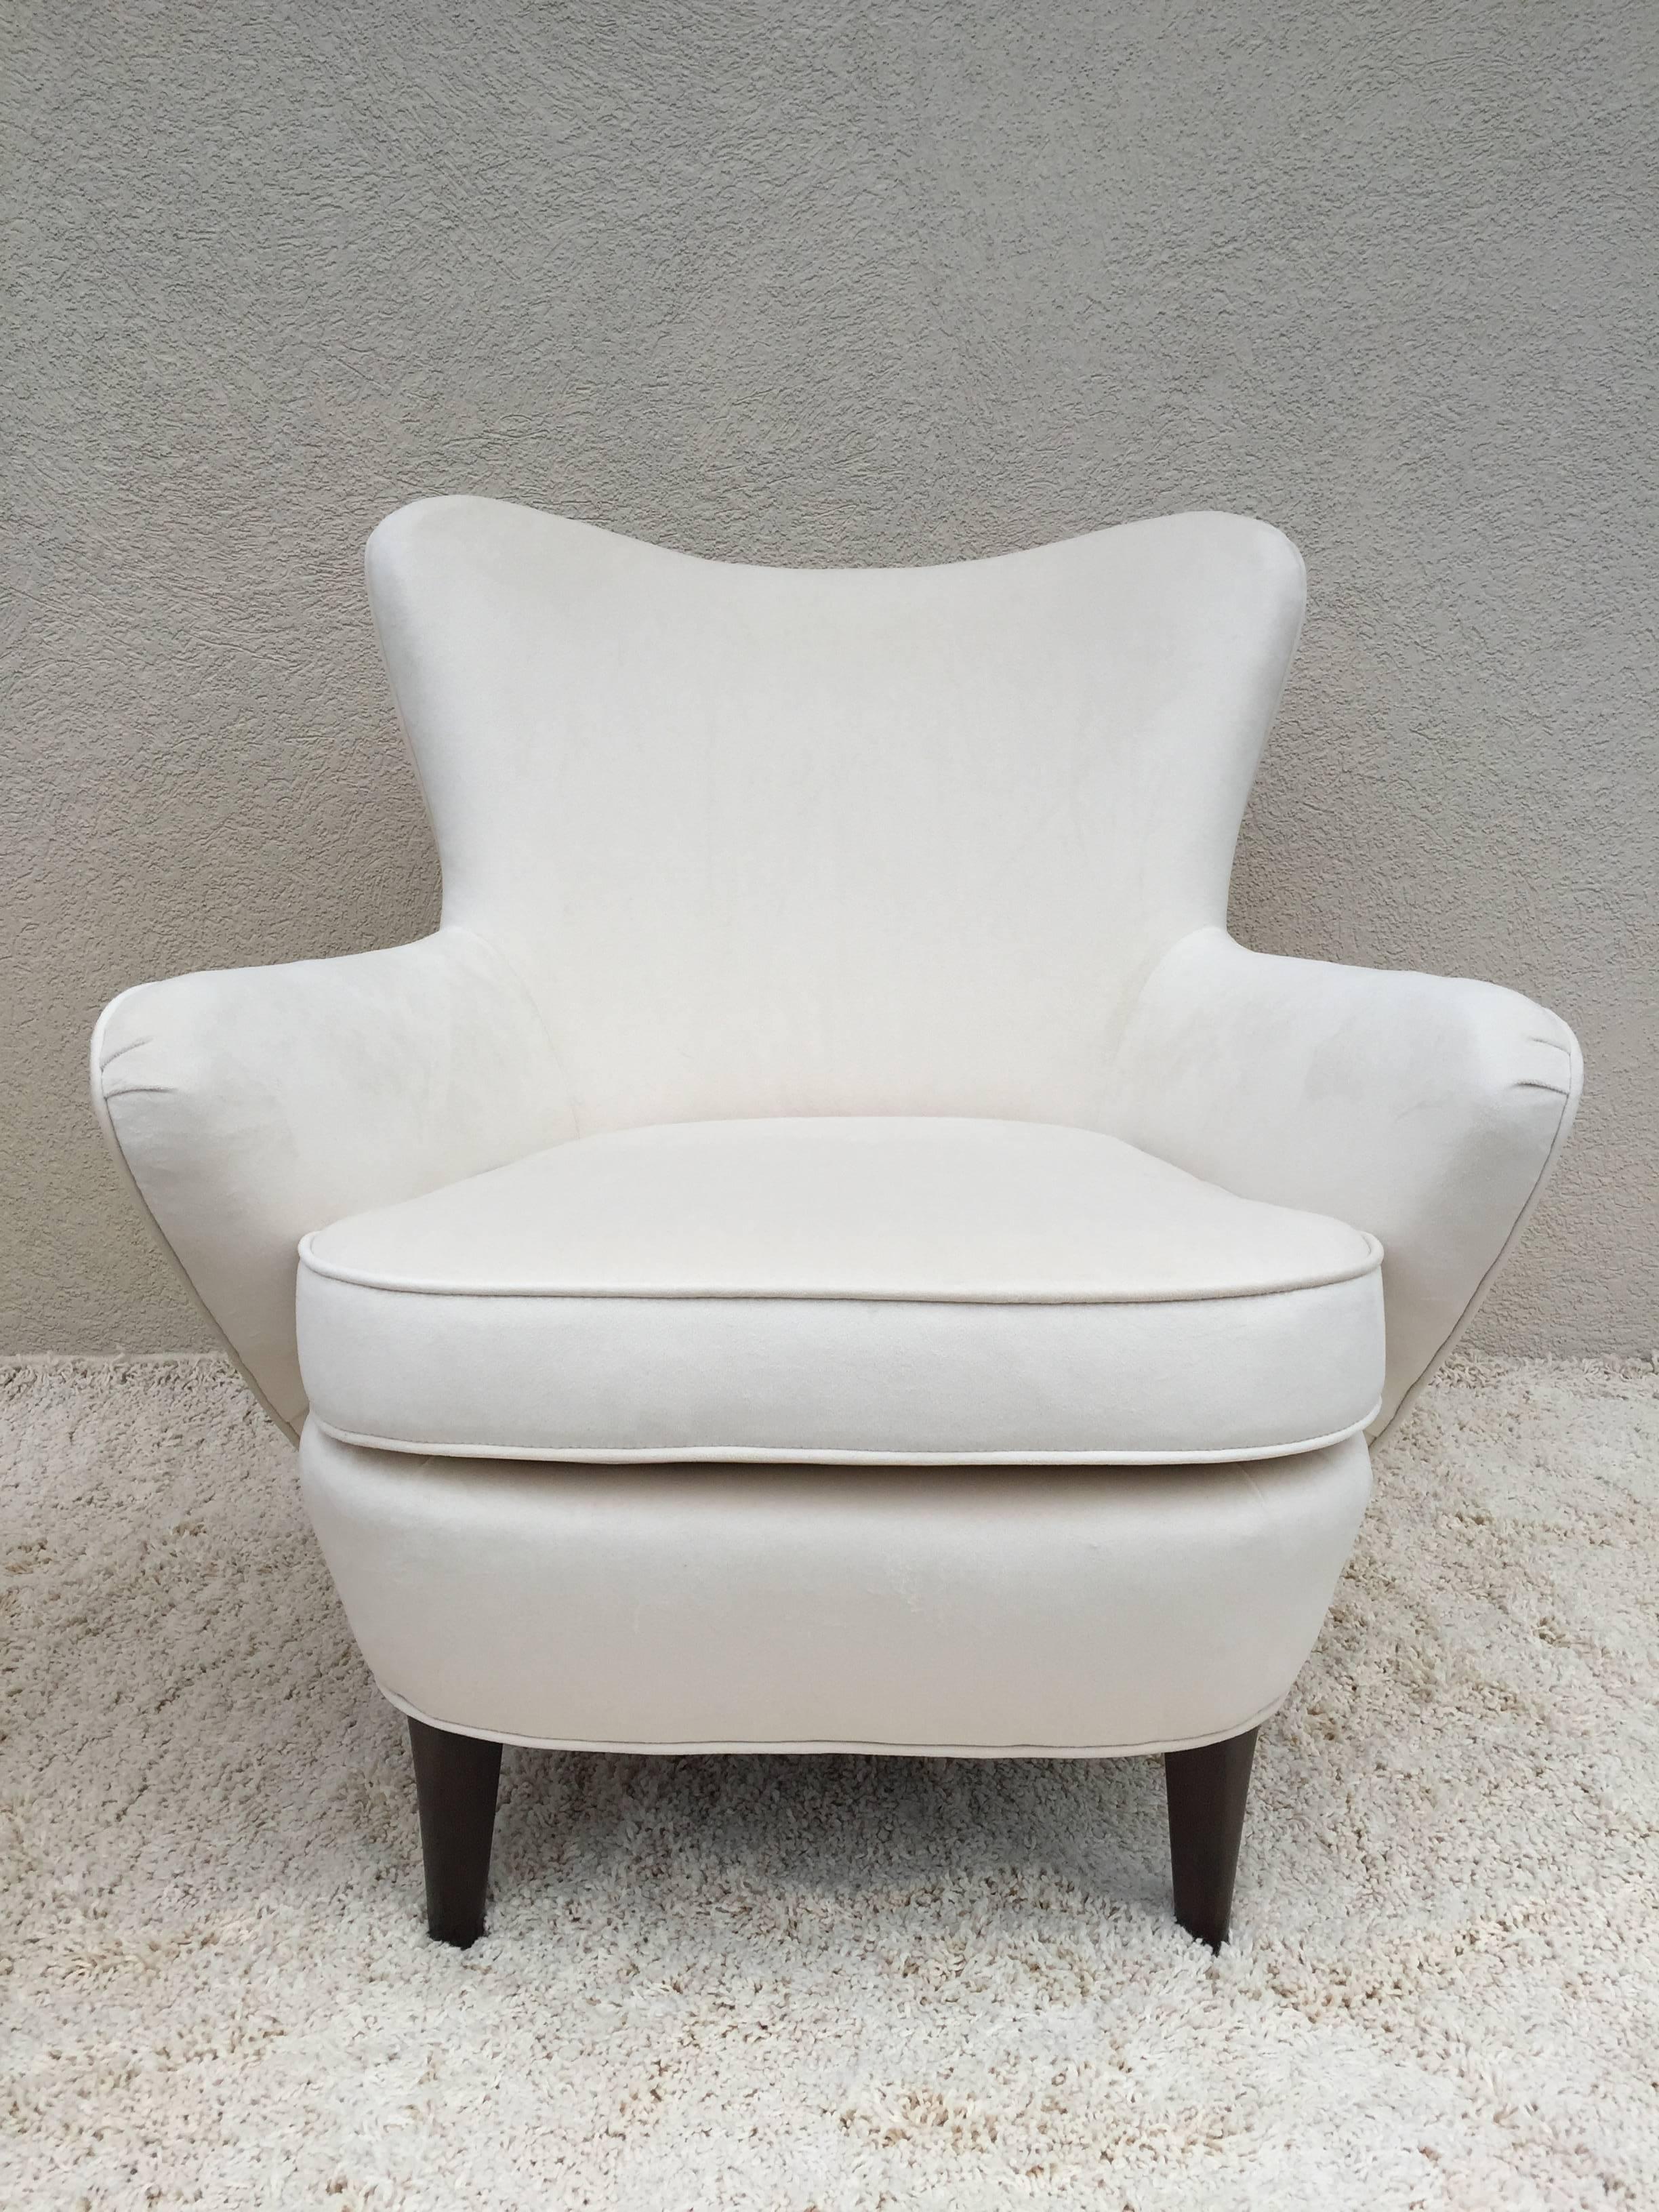 Pair Rare Ernst Schwadron Club Chairs for Rena Rosenthal, NYC,
Upholstered in a off White Velvet finish Fabric, Brown Walnut  Legs.Ernst Schwadron was an Architect and Interior in Austria Circa 1930's,then in America working  with Vladimir Kagan